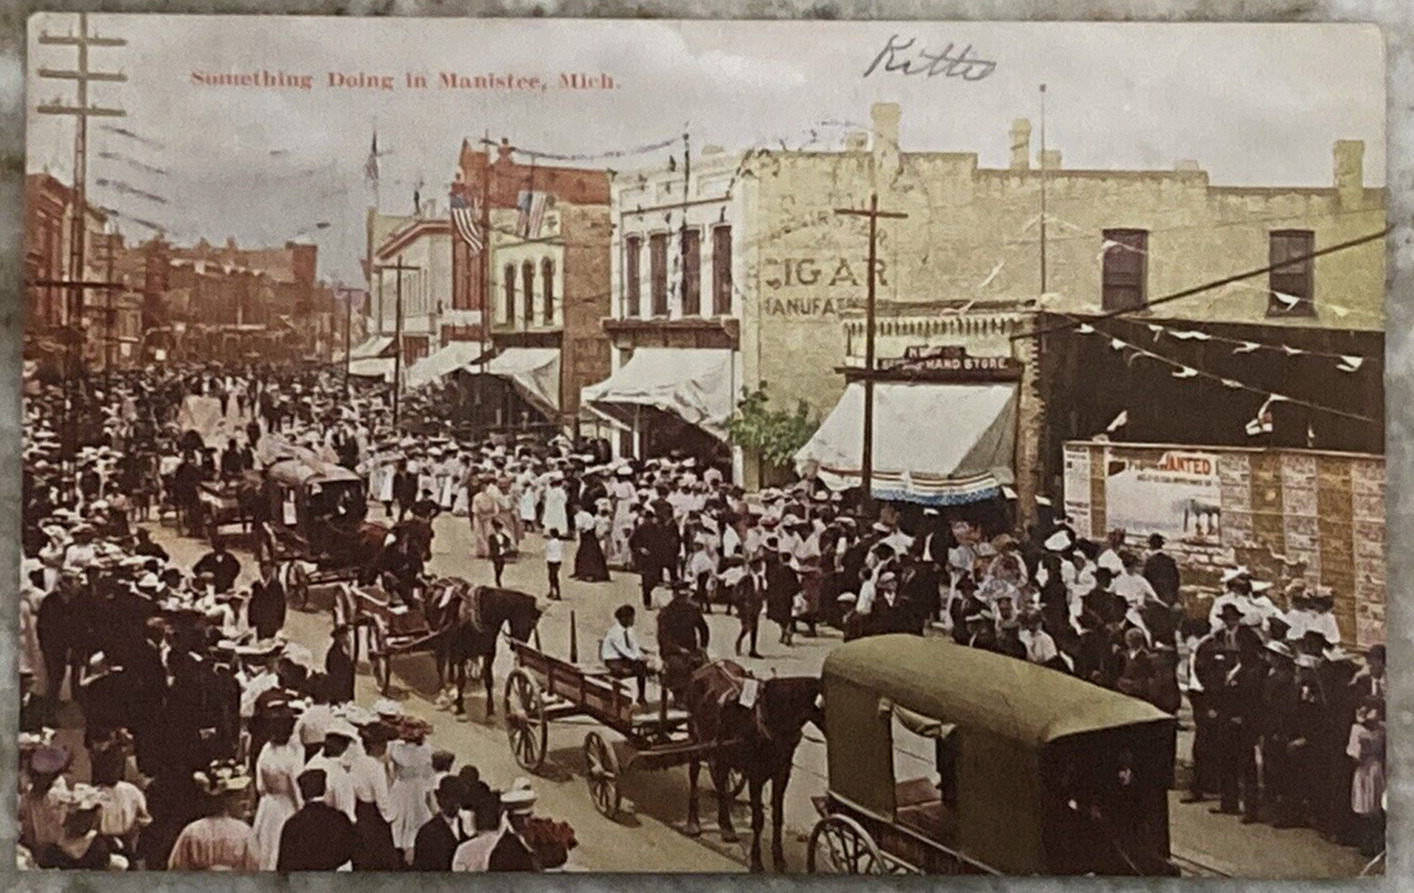 Something Doing in Manistee Michigan Horse & Buggy Scene 1908 DB Postcard A838